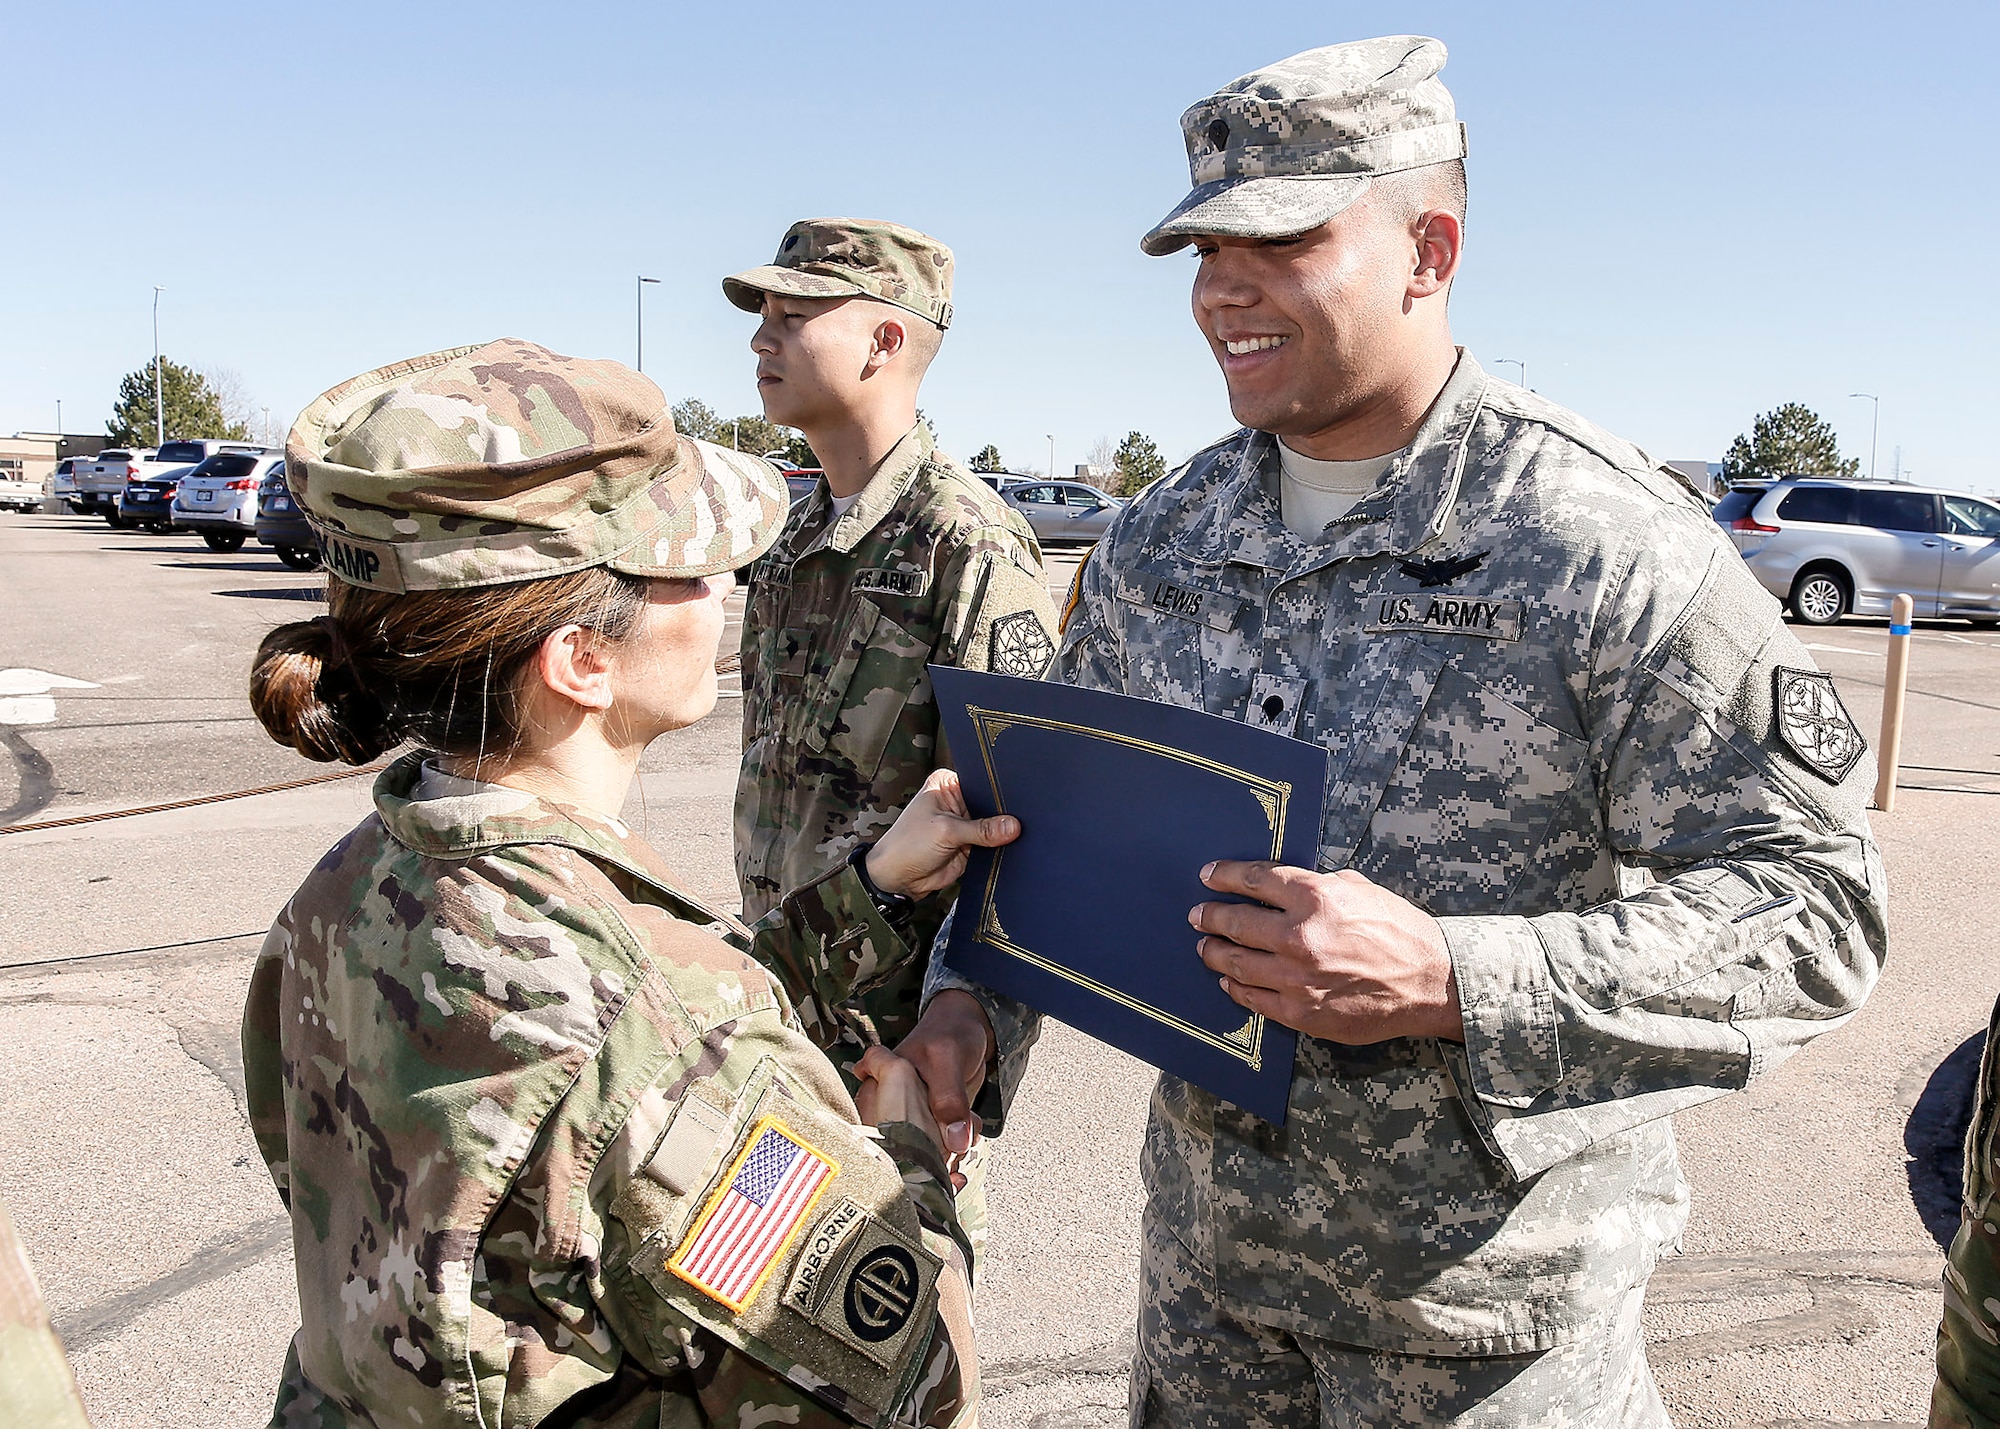 U.S. Army Col. Michele Bredenkamp, 704th Military Intelligence Battalion brigade commander, gives Spc. Kevin Lewis, 743d Military Intelligence Battalion Alpha company, his Space Badge certificate March 10, 2016, at Buckley Air Force Base, Colo. The Space Badge can be awarded to active Army, Army Reserve and National Guard Soldiers who successfully complete appropriate space-related training and attain the required Army space cadre experience. There are three levels of the Space Badge: basic, senior and master. (U.S. Army photo by Sgt. Kristopher Dimond/Released) 